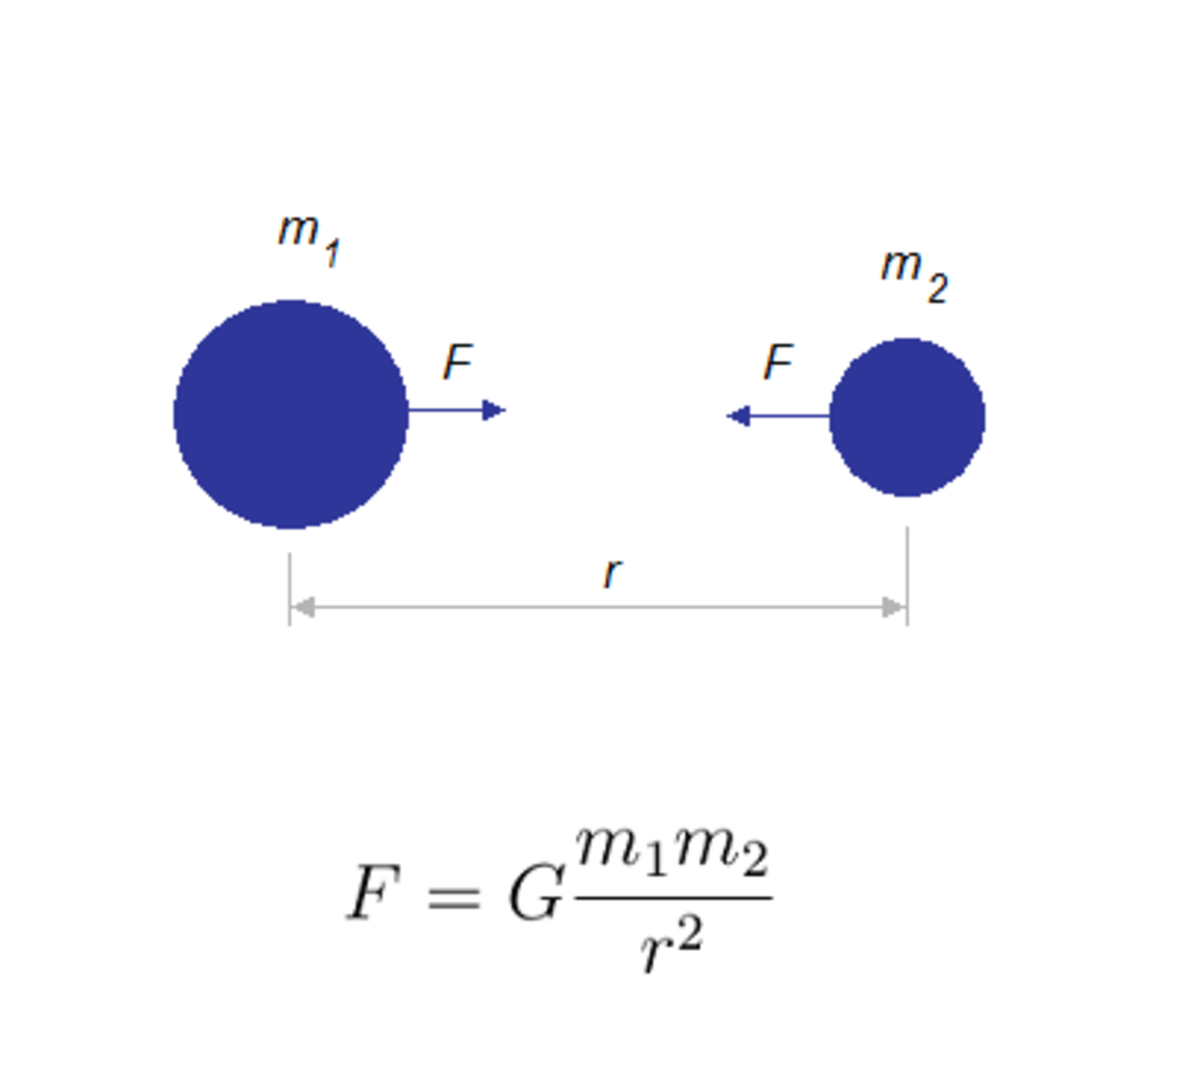 Fig. 3. The Newton's law of universal gravitation, a physical law empirically derived. 